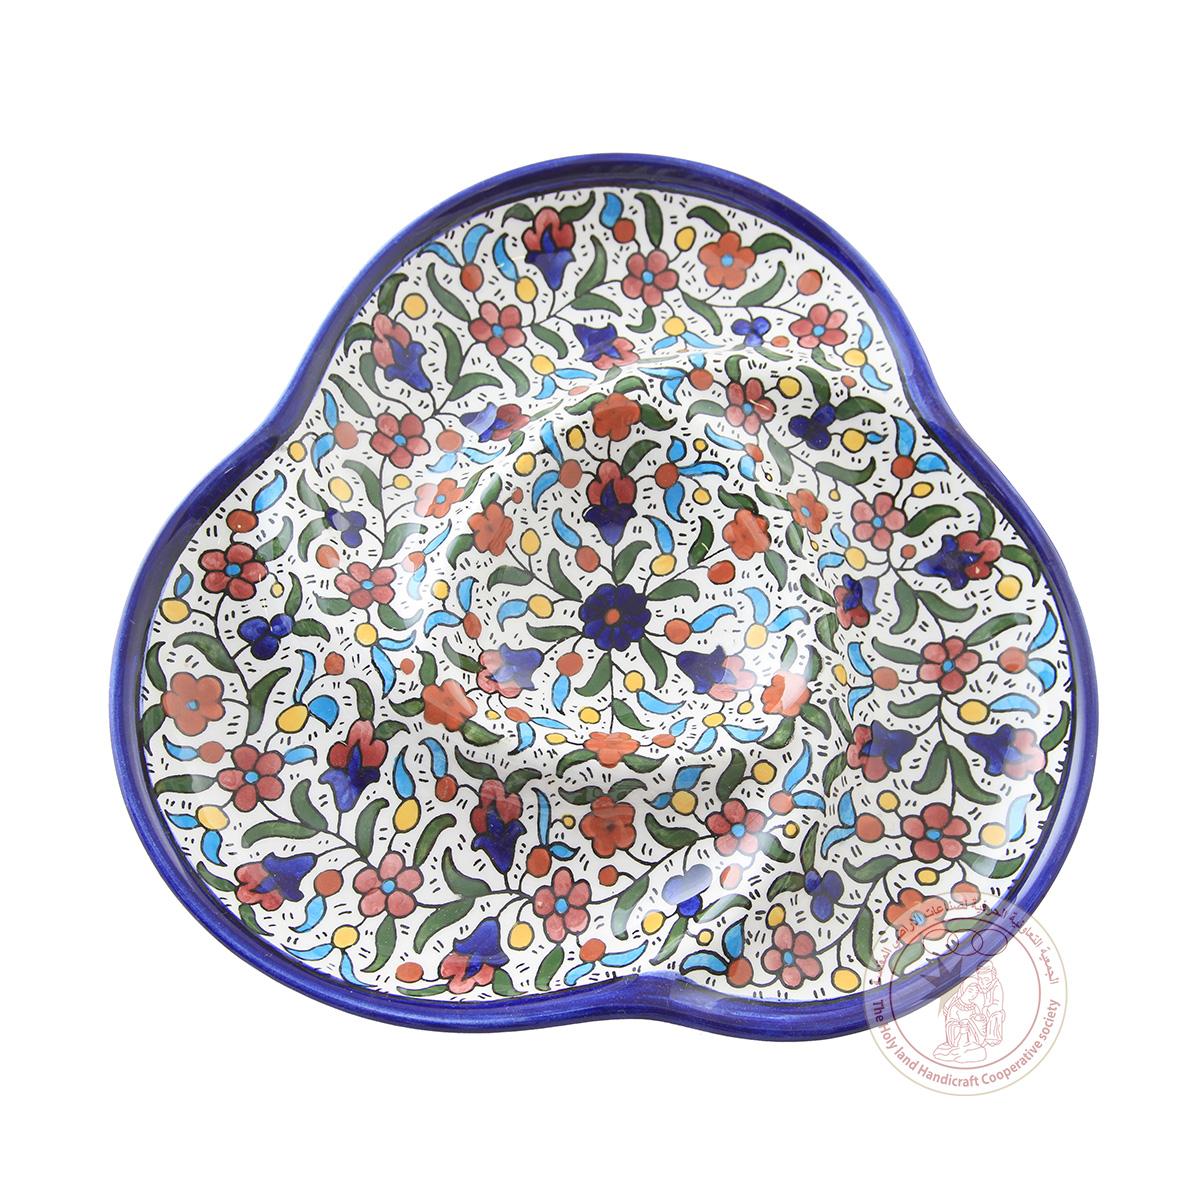 Multi-Colored Flowers and Tulips' Flower-Shaped Bowl - 24 CM, Ceramic